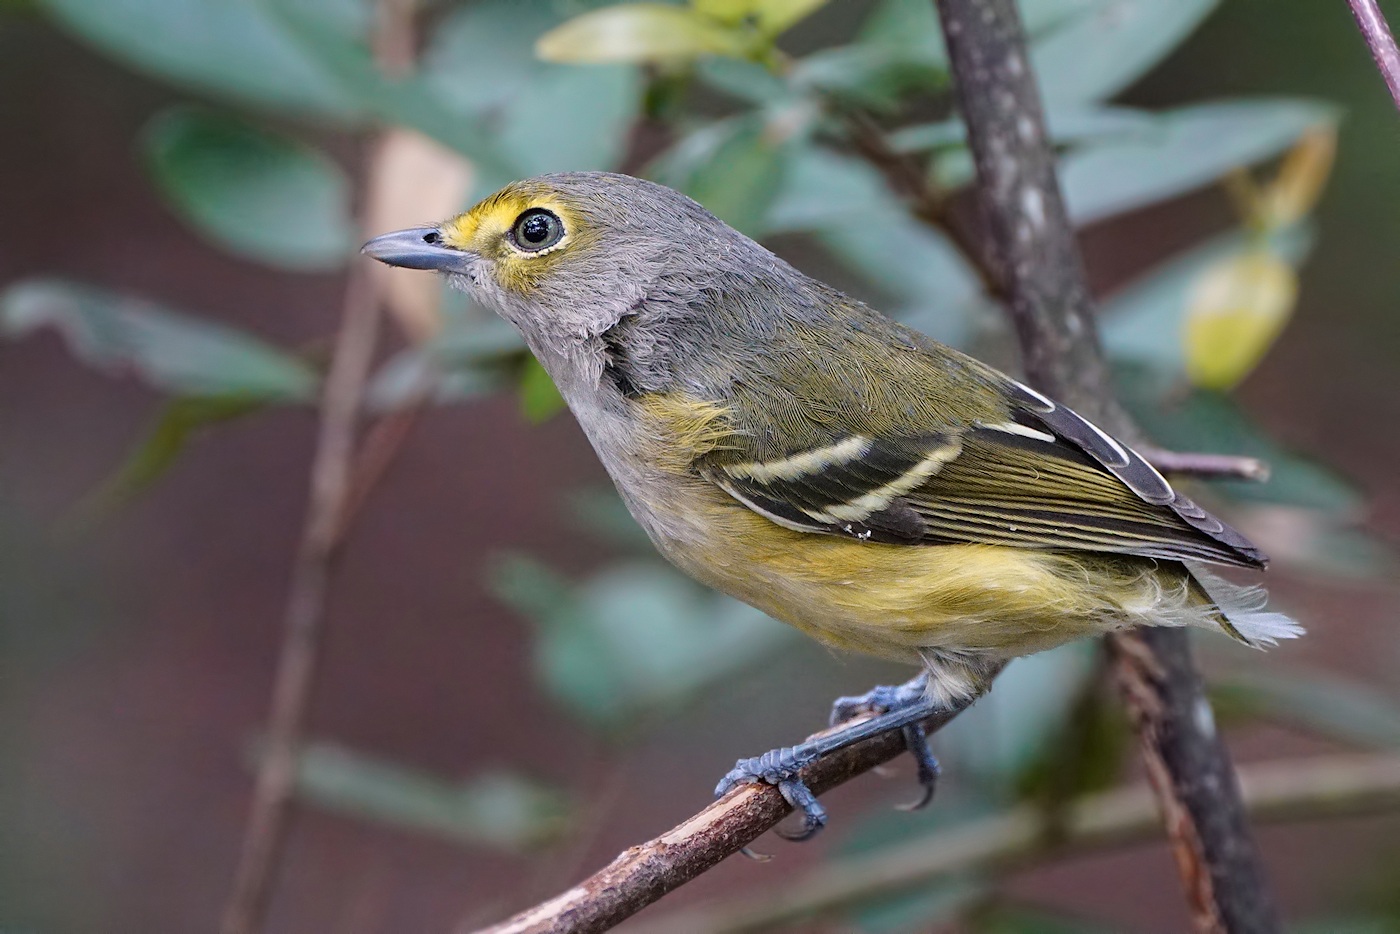 White-eyed vireo missing a tail